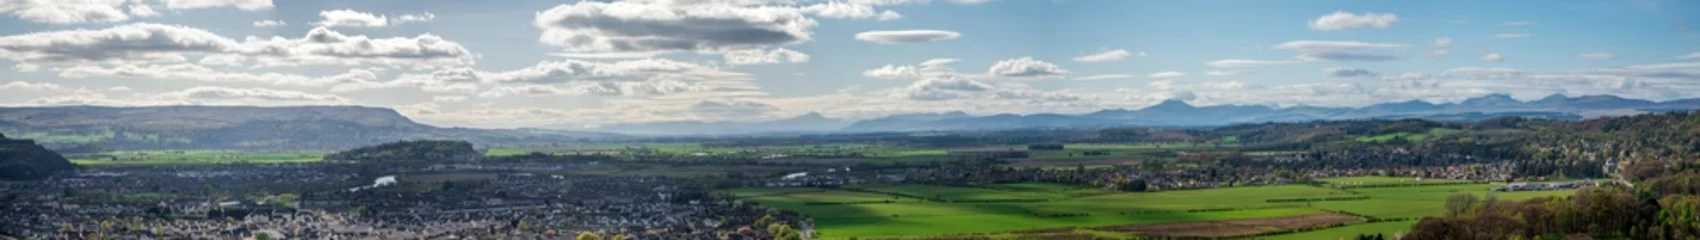  Panoramic view of Stirling City, Menteith hills and river Forth from the Wallace Monument © anastasstyles